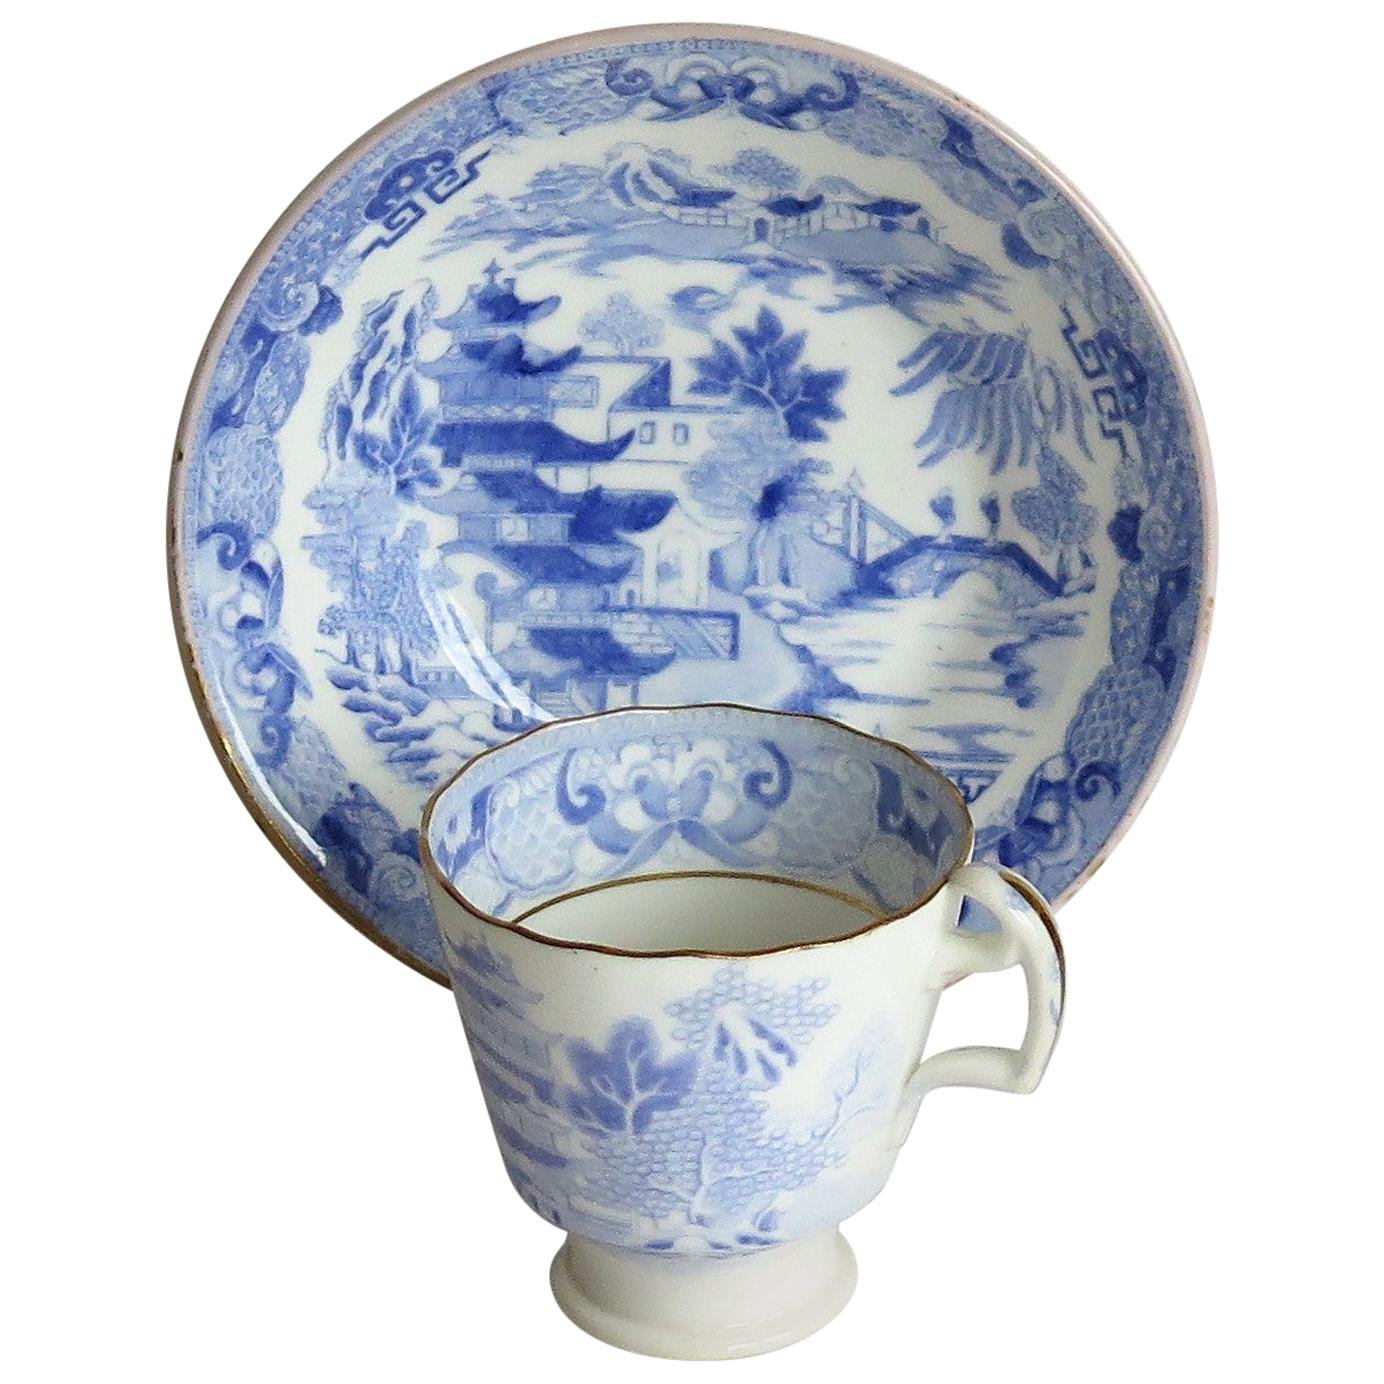 Miles Mason Porcelain Cup and Saucer Blue Broseley Willow Pattern, circa 1815